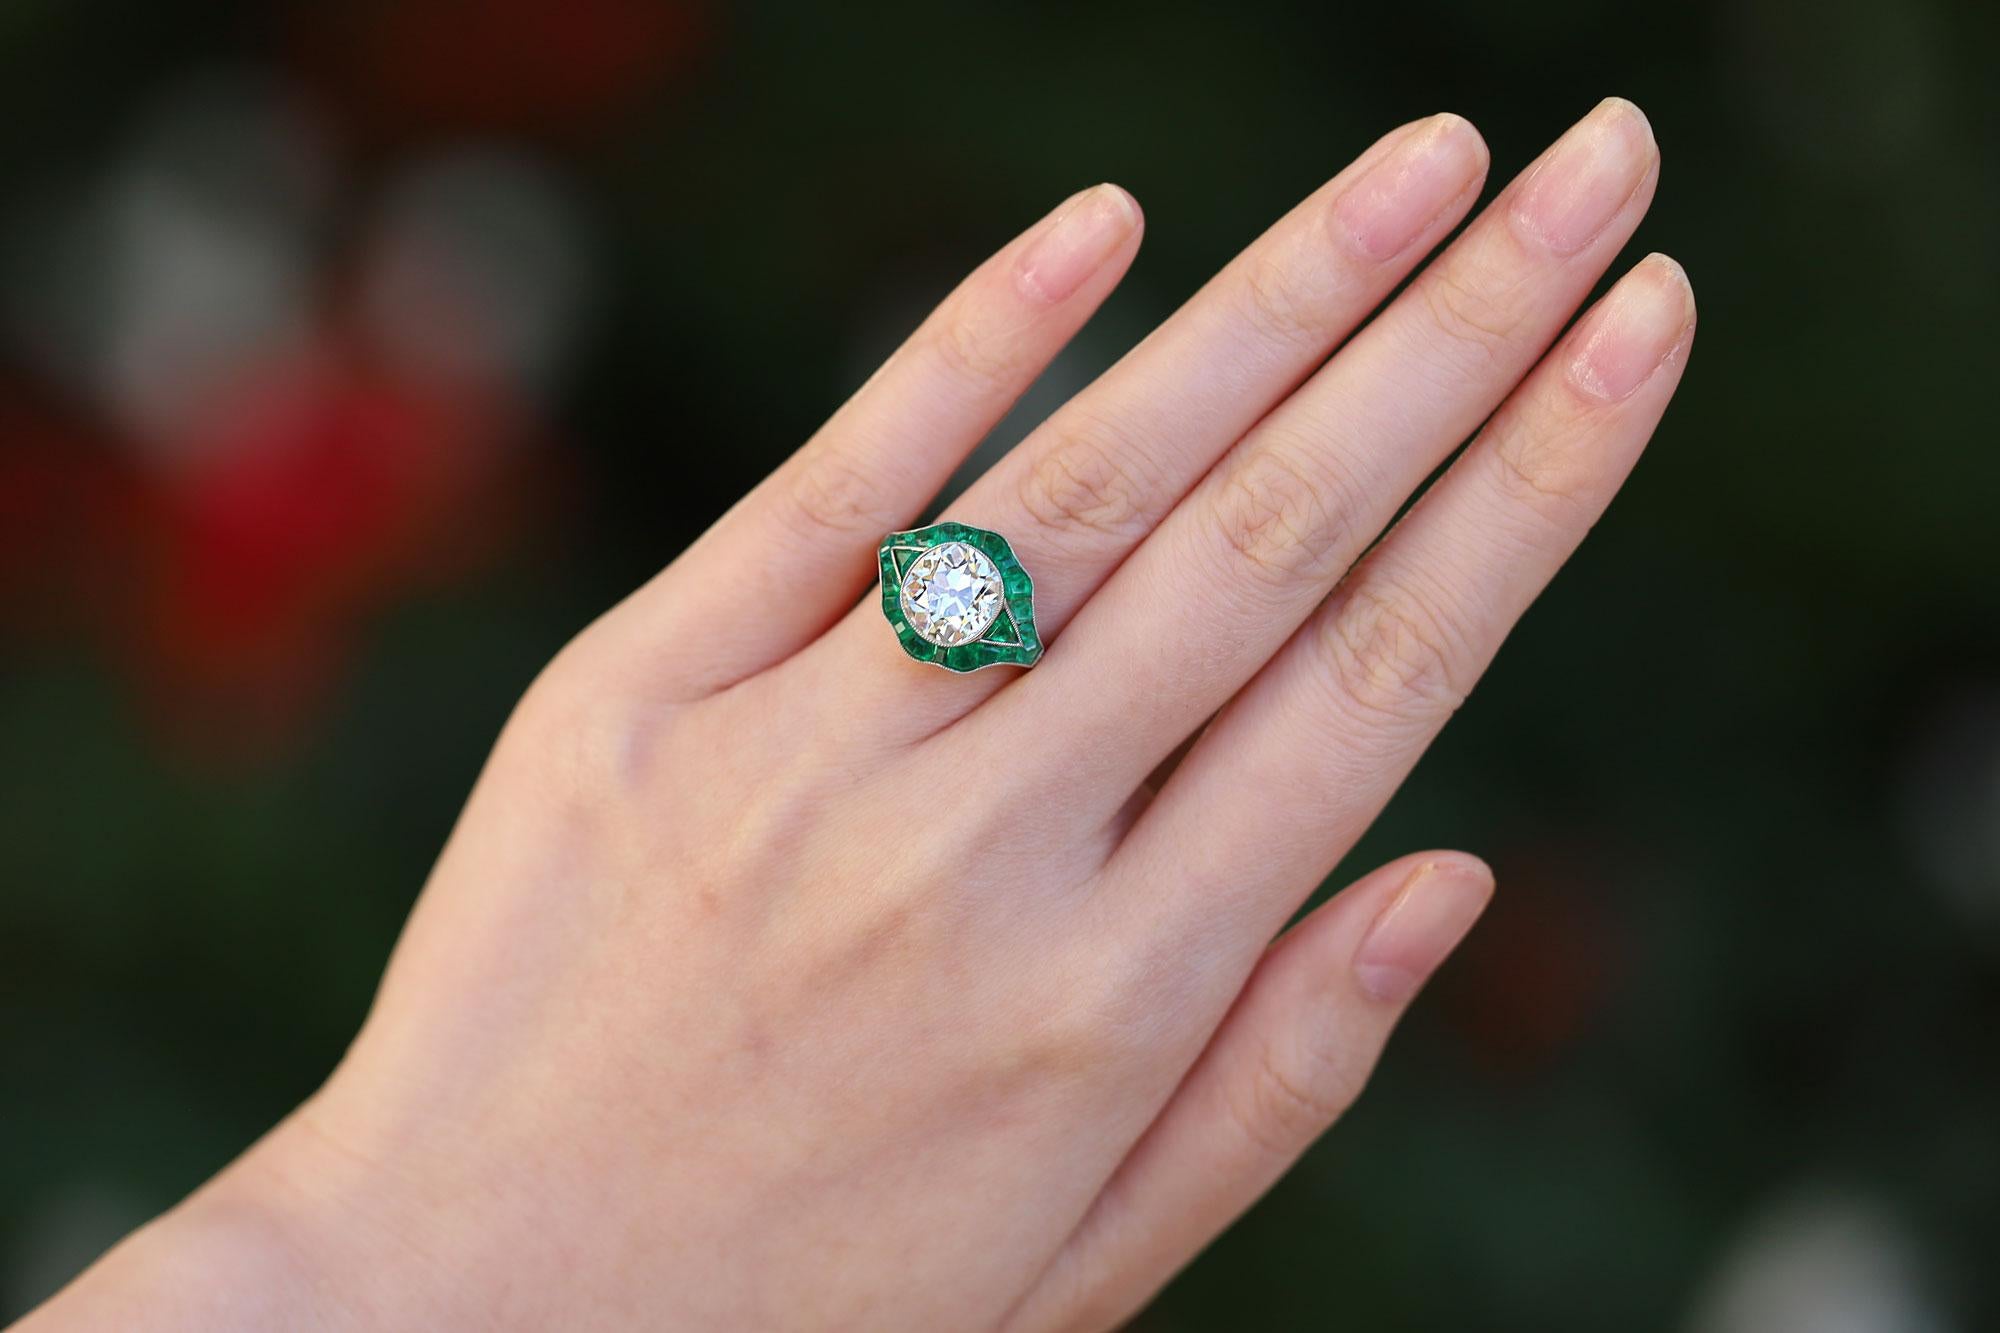 Centering on a large 3.05 Carat, chunky and scintillating antique old mine cut diamond, this Art Deco inspired engagement ring is a show stopper. Encased in a platinum, milgrain-studded bezel and surrounded with rich, green emeralds, this important